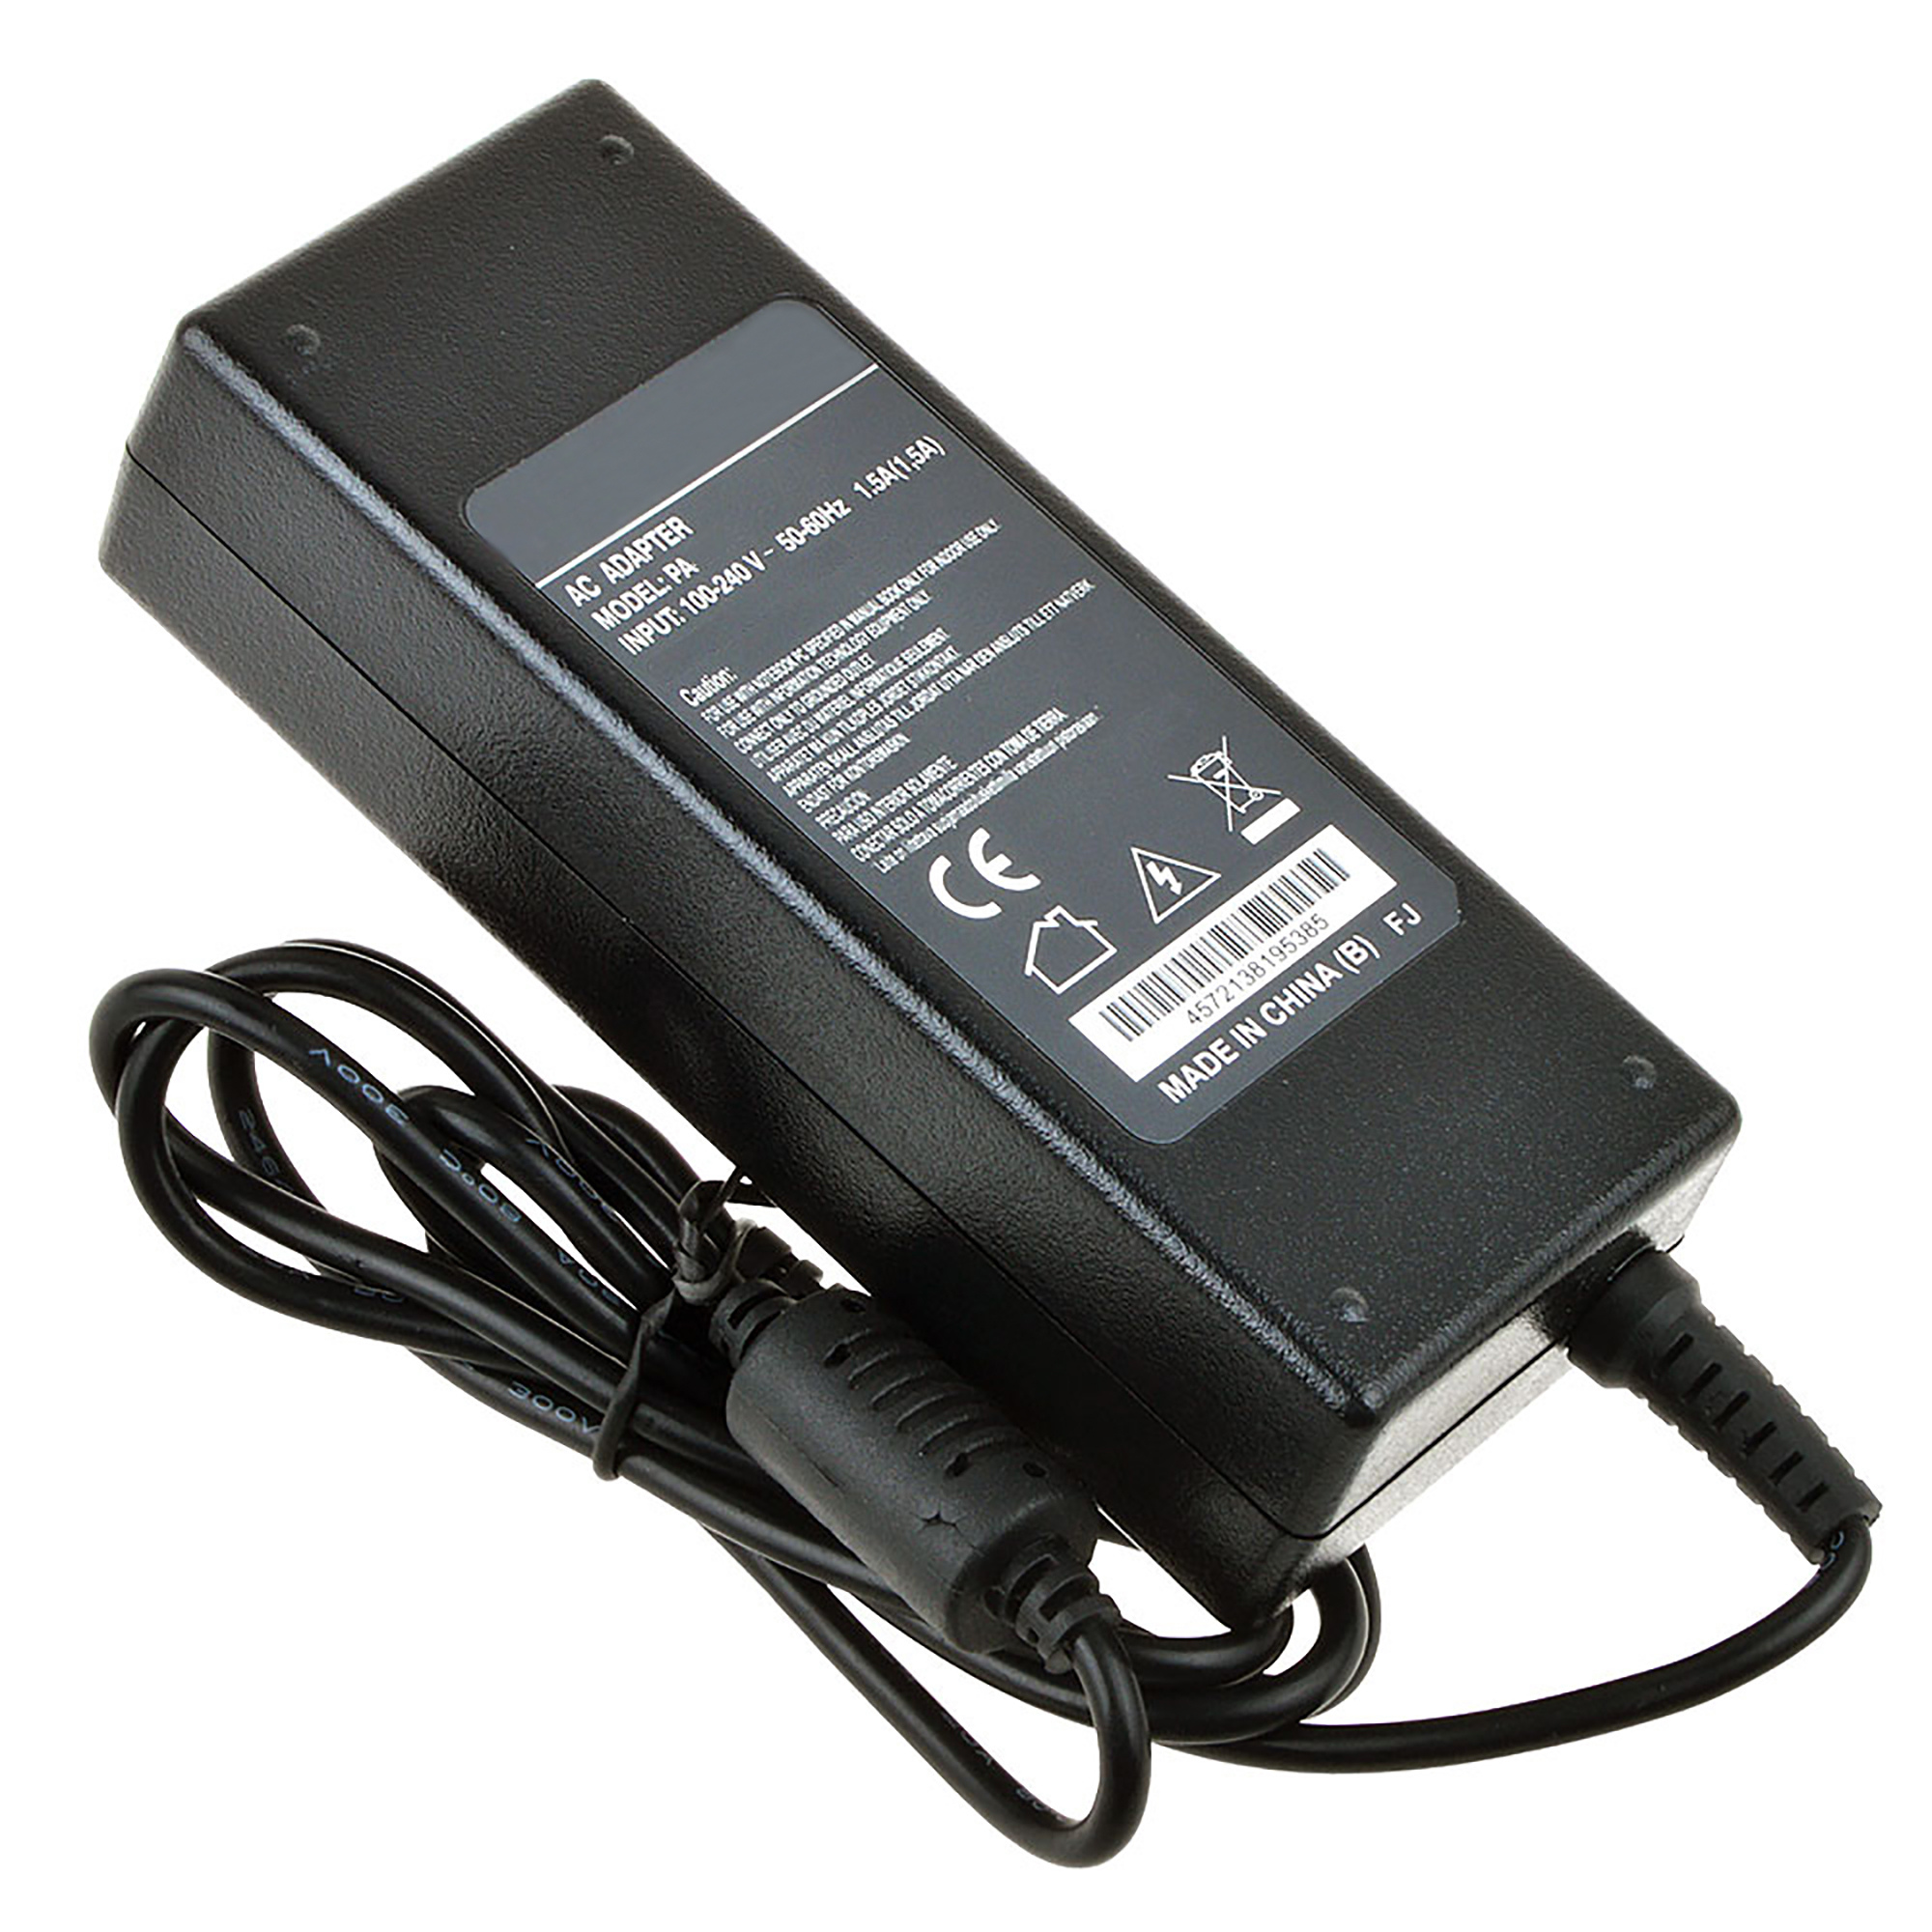 PKPOWER AC Adapter Replacement for Vizio VSB210WS Sound Bar Speaker Wireless Subwoofer Power Supply - image 2 of 5